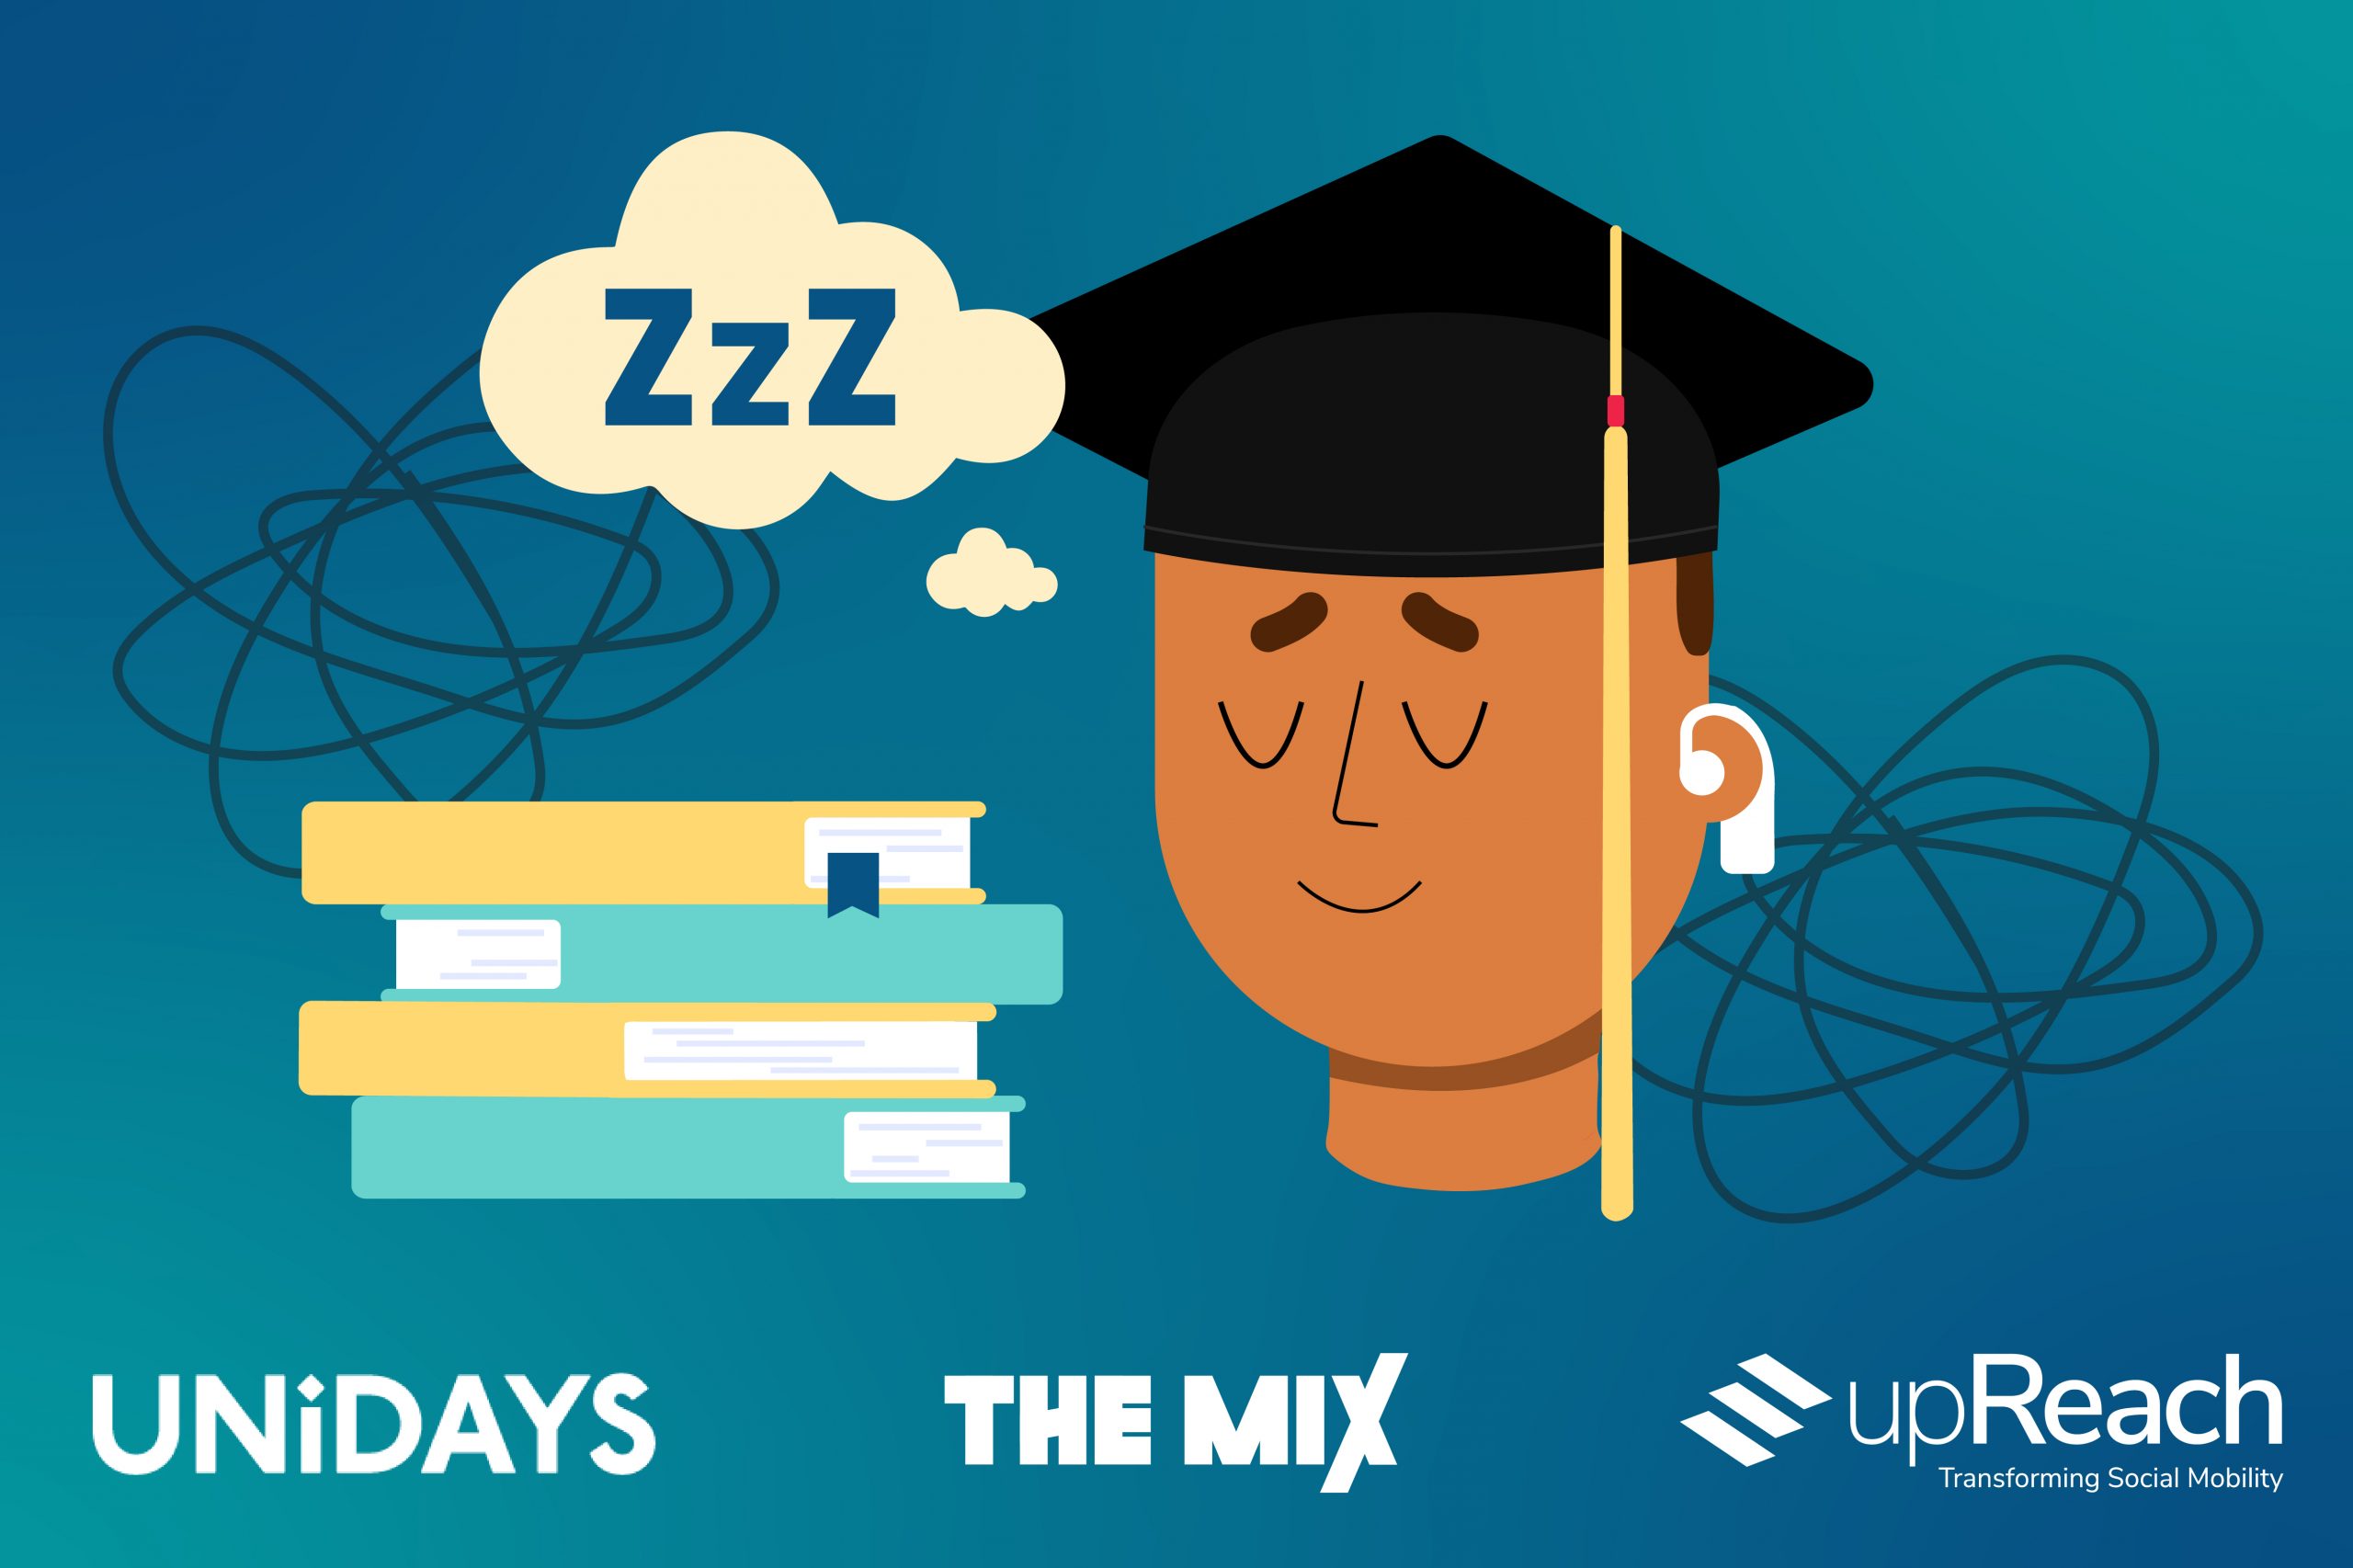 Graphic shows a young person in a graduation cap asleep next to a pile of books. This represents the transition from school to university.